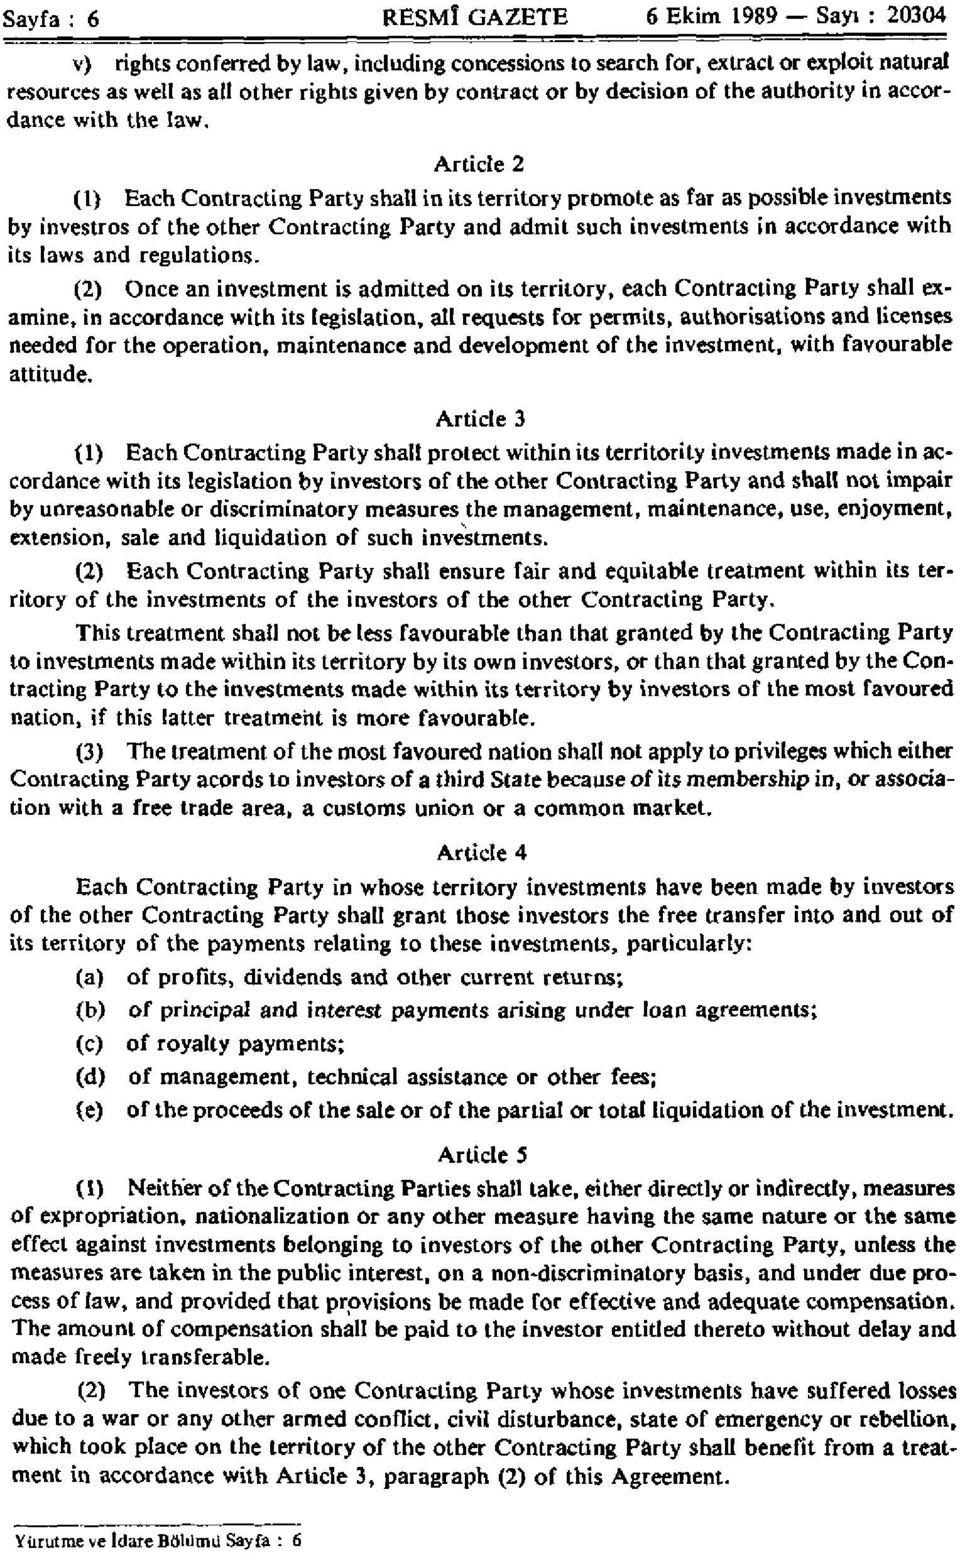 Article 2 (1) Each Contracting Party shall in its territory promote as far as possible investments by investros of the other Contracting Party and admit such investments in accordance with its laws